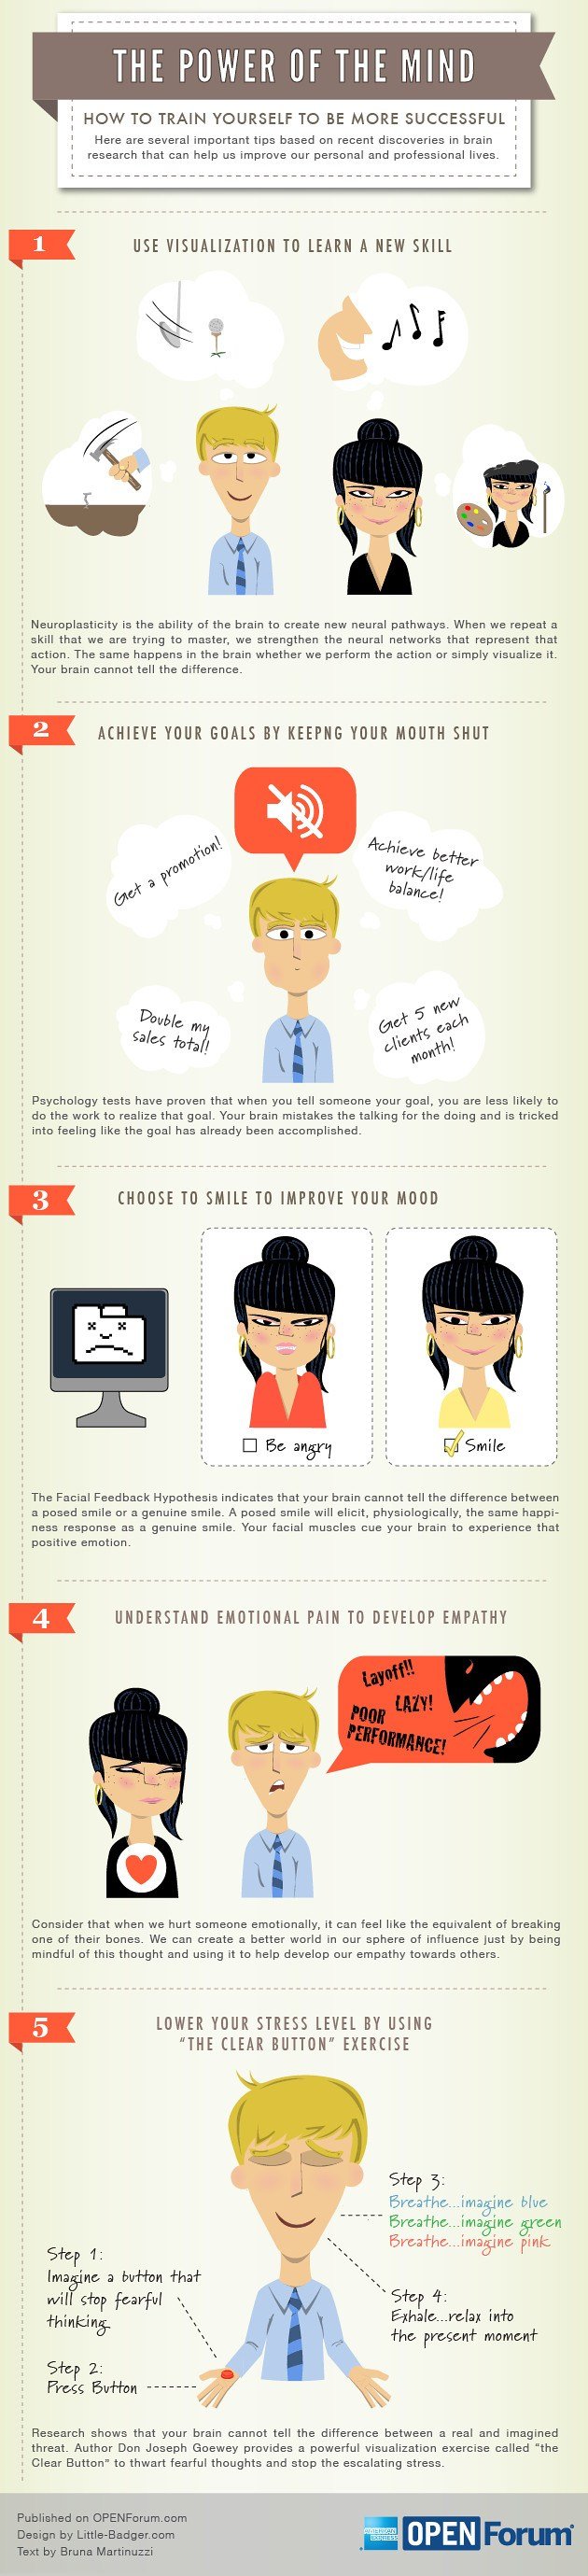 Empower Your Mind To Become Successful in 5 Easy Steps Infographic